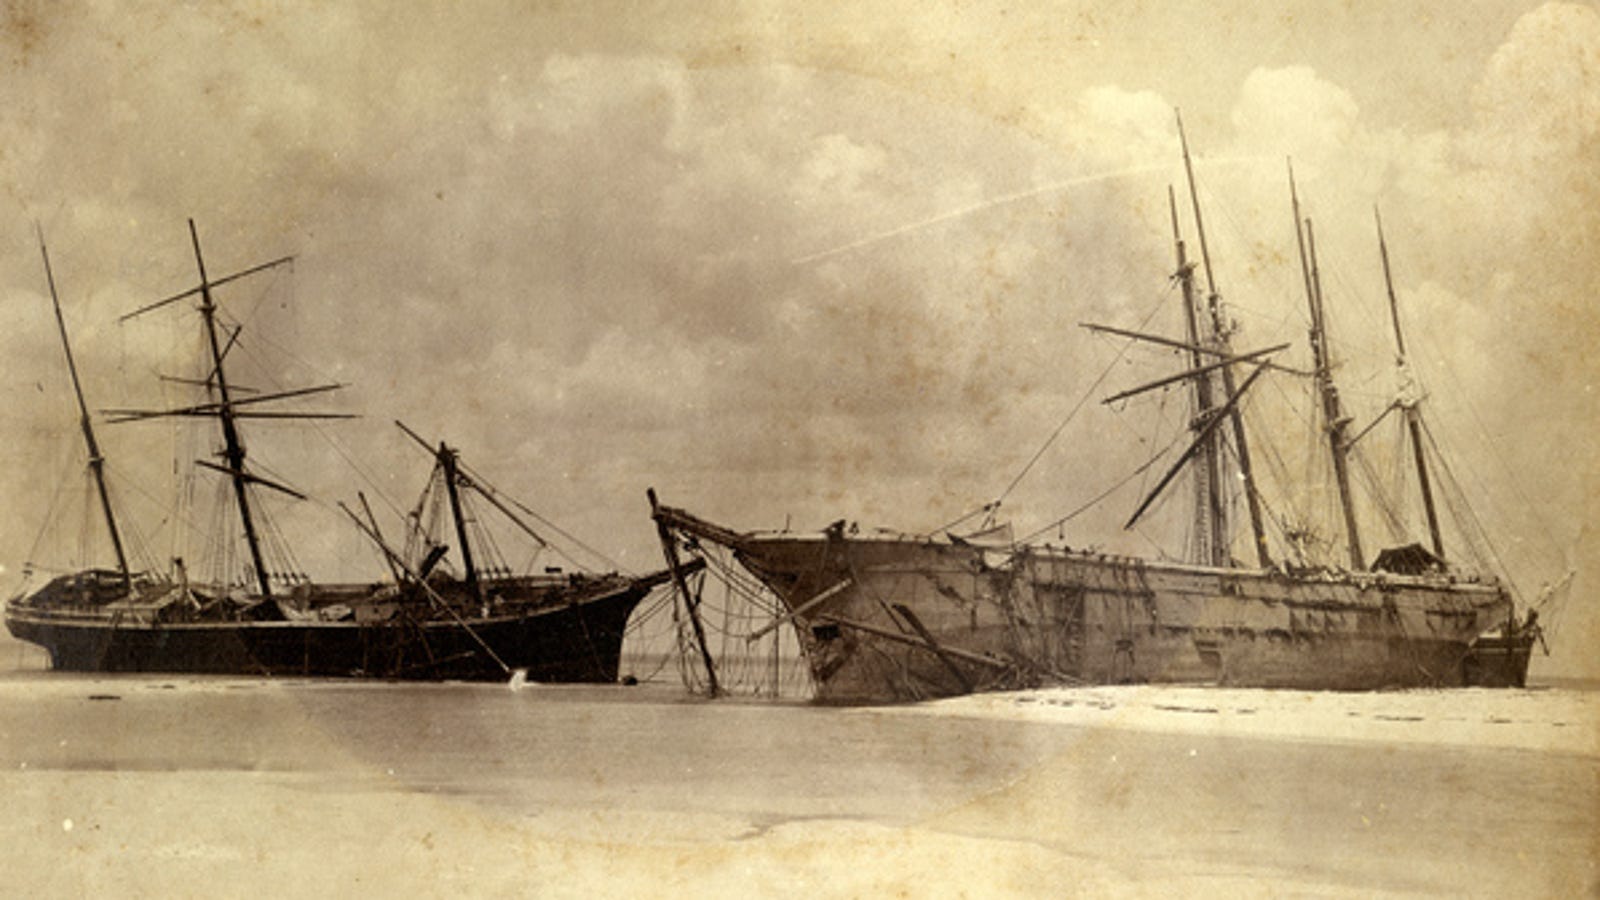 photo of Report: Hurricane Michael's Storm Surge Dredged Up 119-Year-Old Vessels Wrecked By Carrabelle Hurricane  image